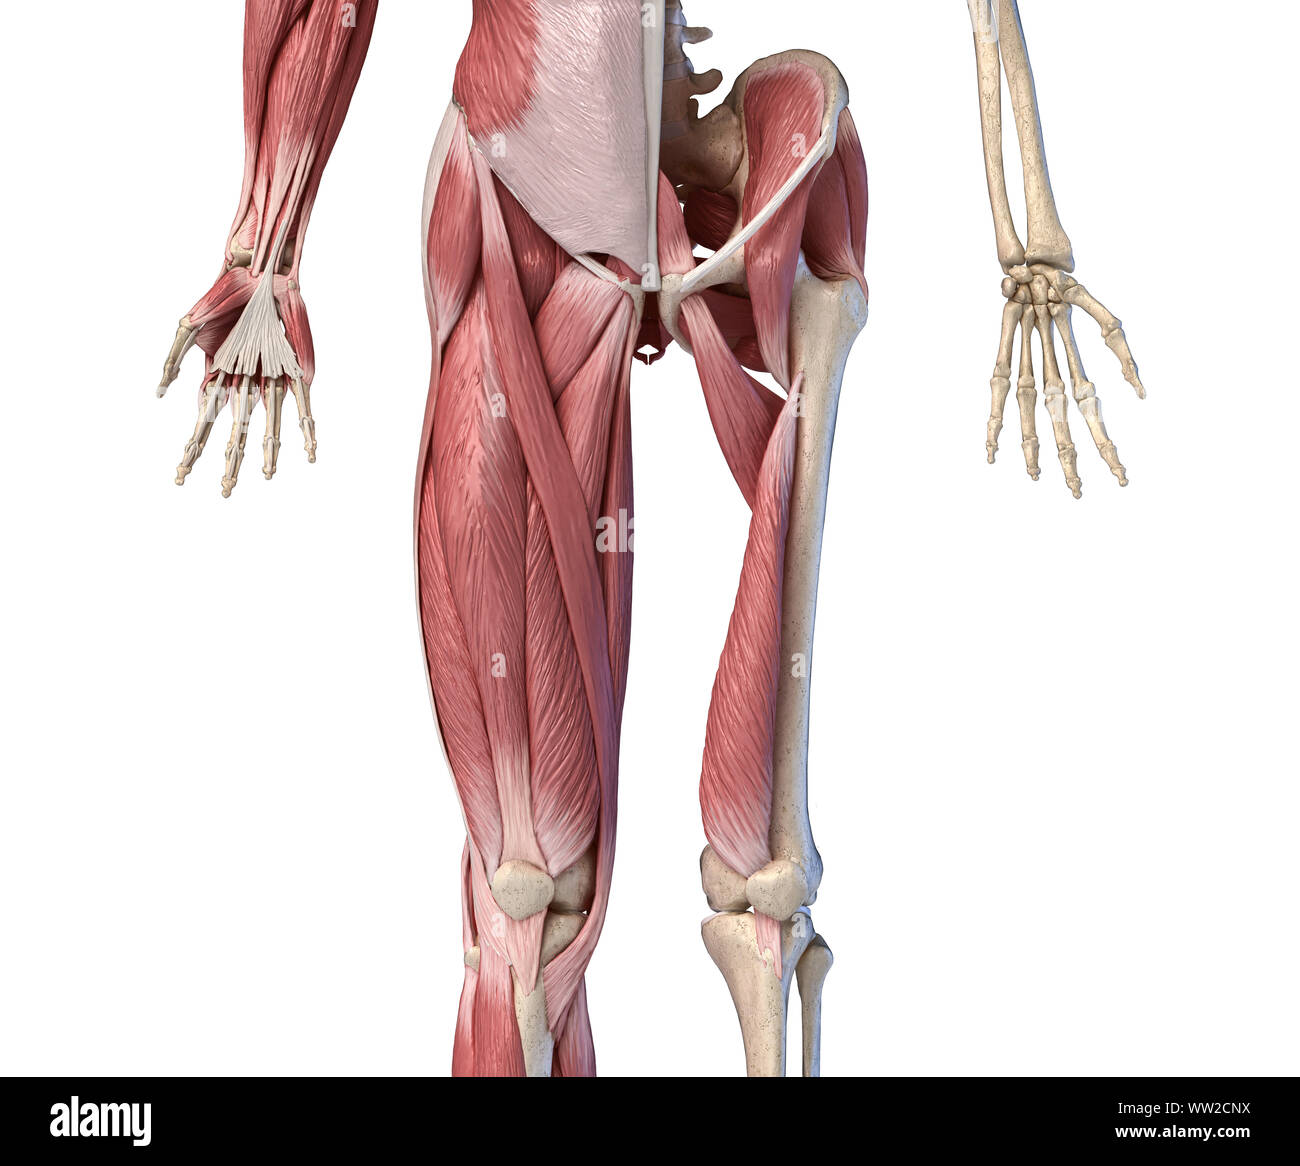 Human male anatomy, limbs and hip muscular and skeletal systems, with internal muscle layers. Front view, on white background. 3d anatomy illustration Stock Photo